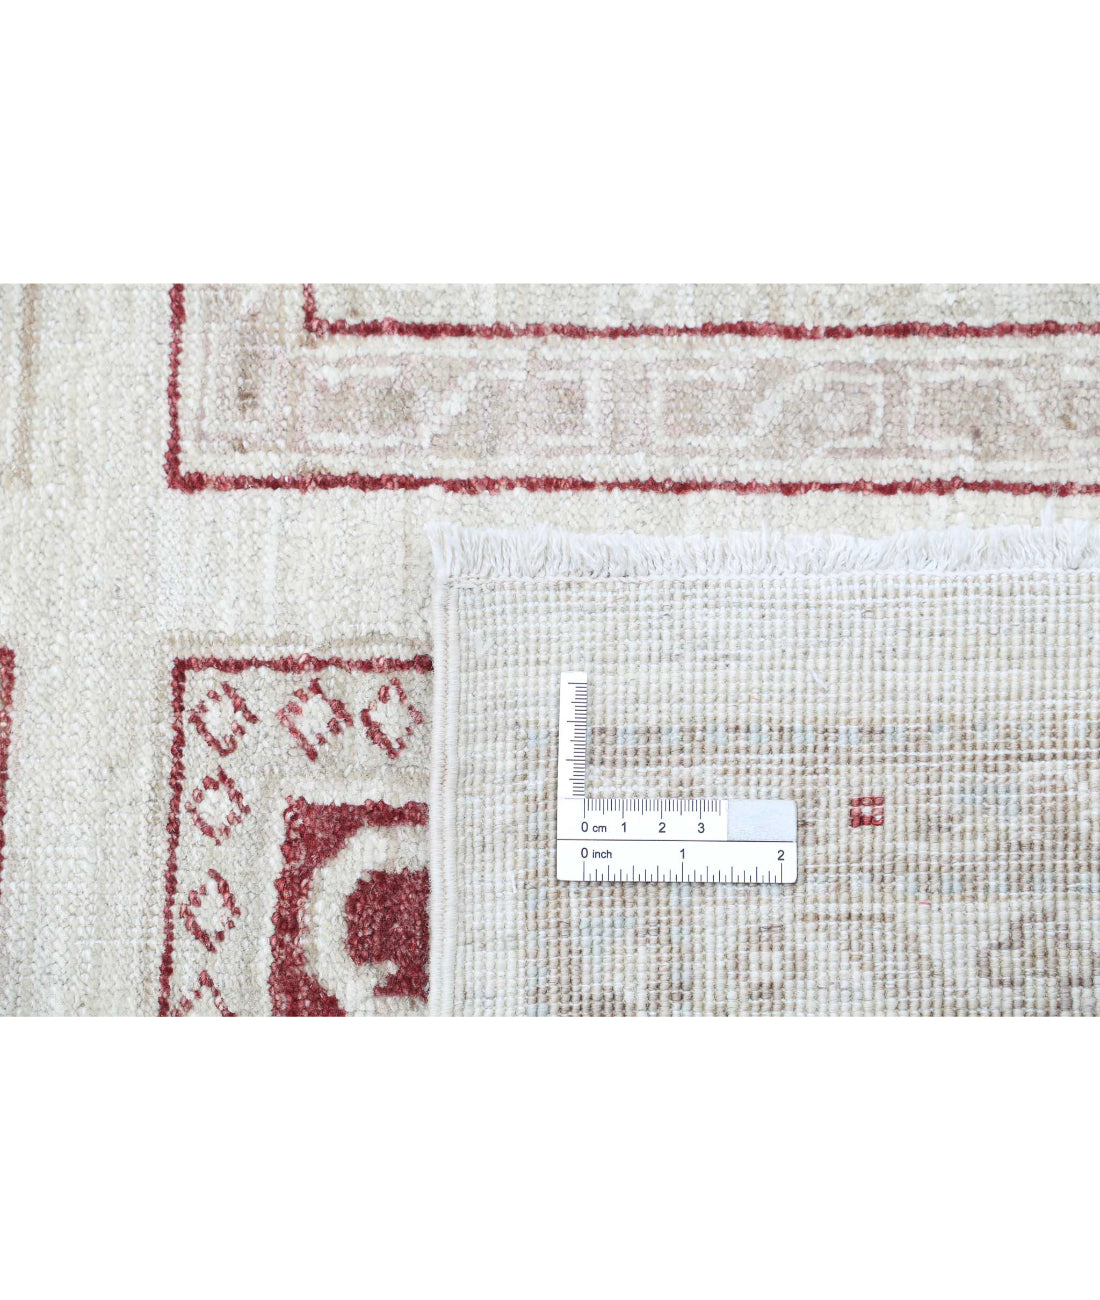 Hand Knotted Serenity Wool Rug - 8'1'' x 11'2'' 8'1'' x 11'2'' (243 X 335) / Ivory / Red